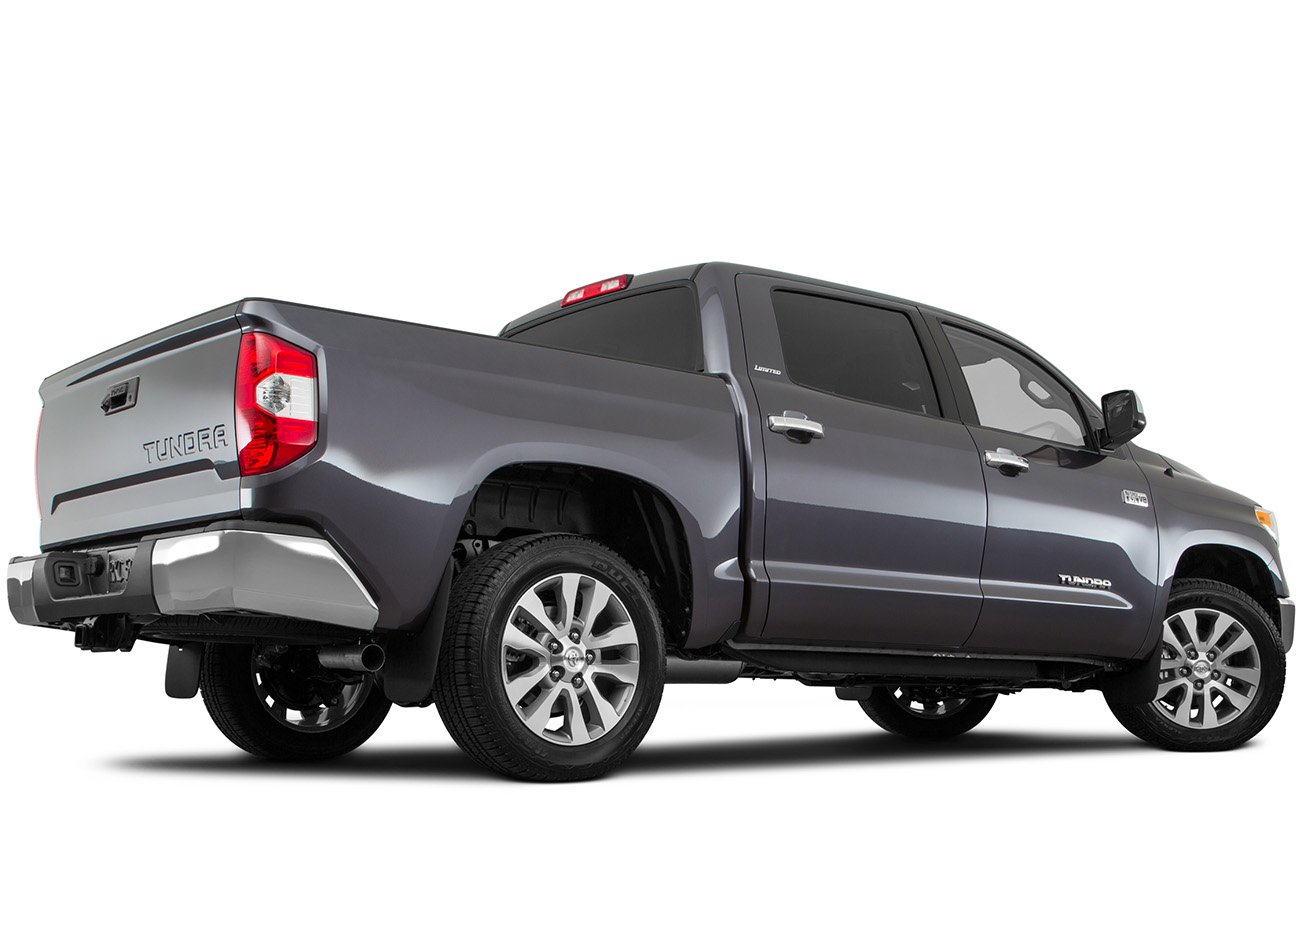 2016 Toyota Tundra Research, photos, specs, and expertise | CarMax